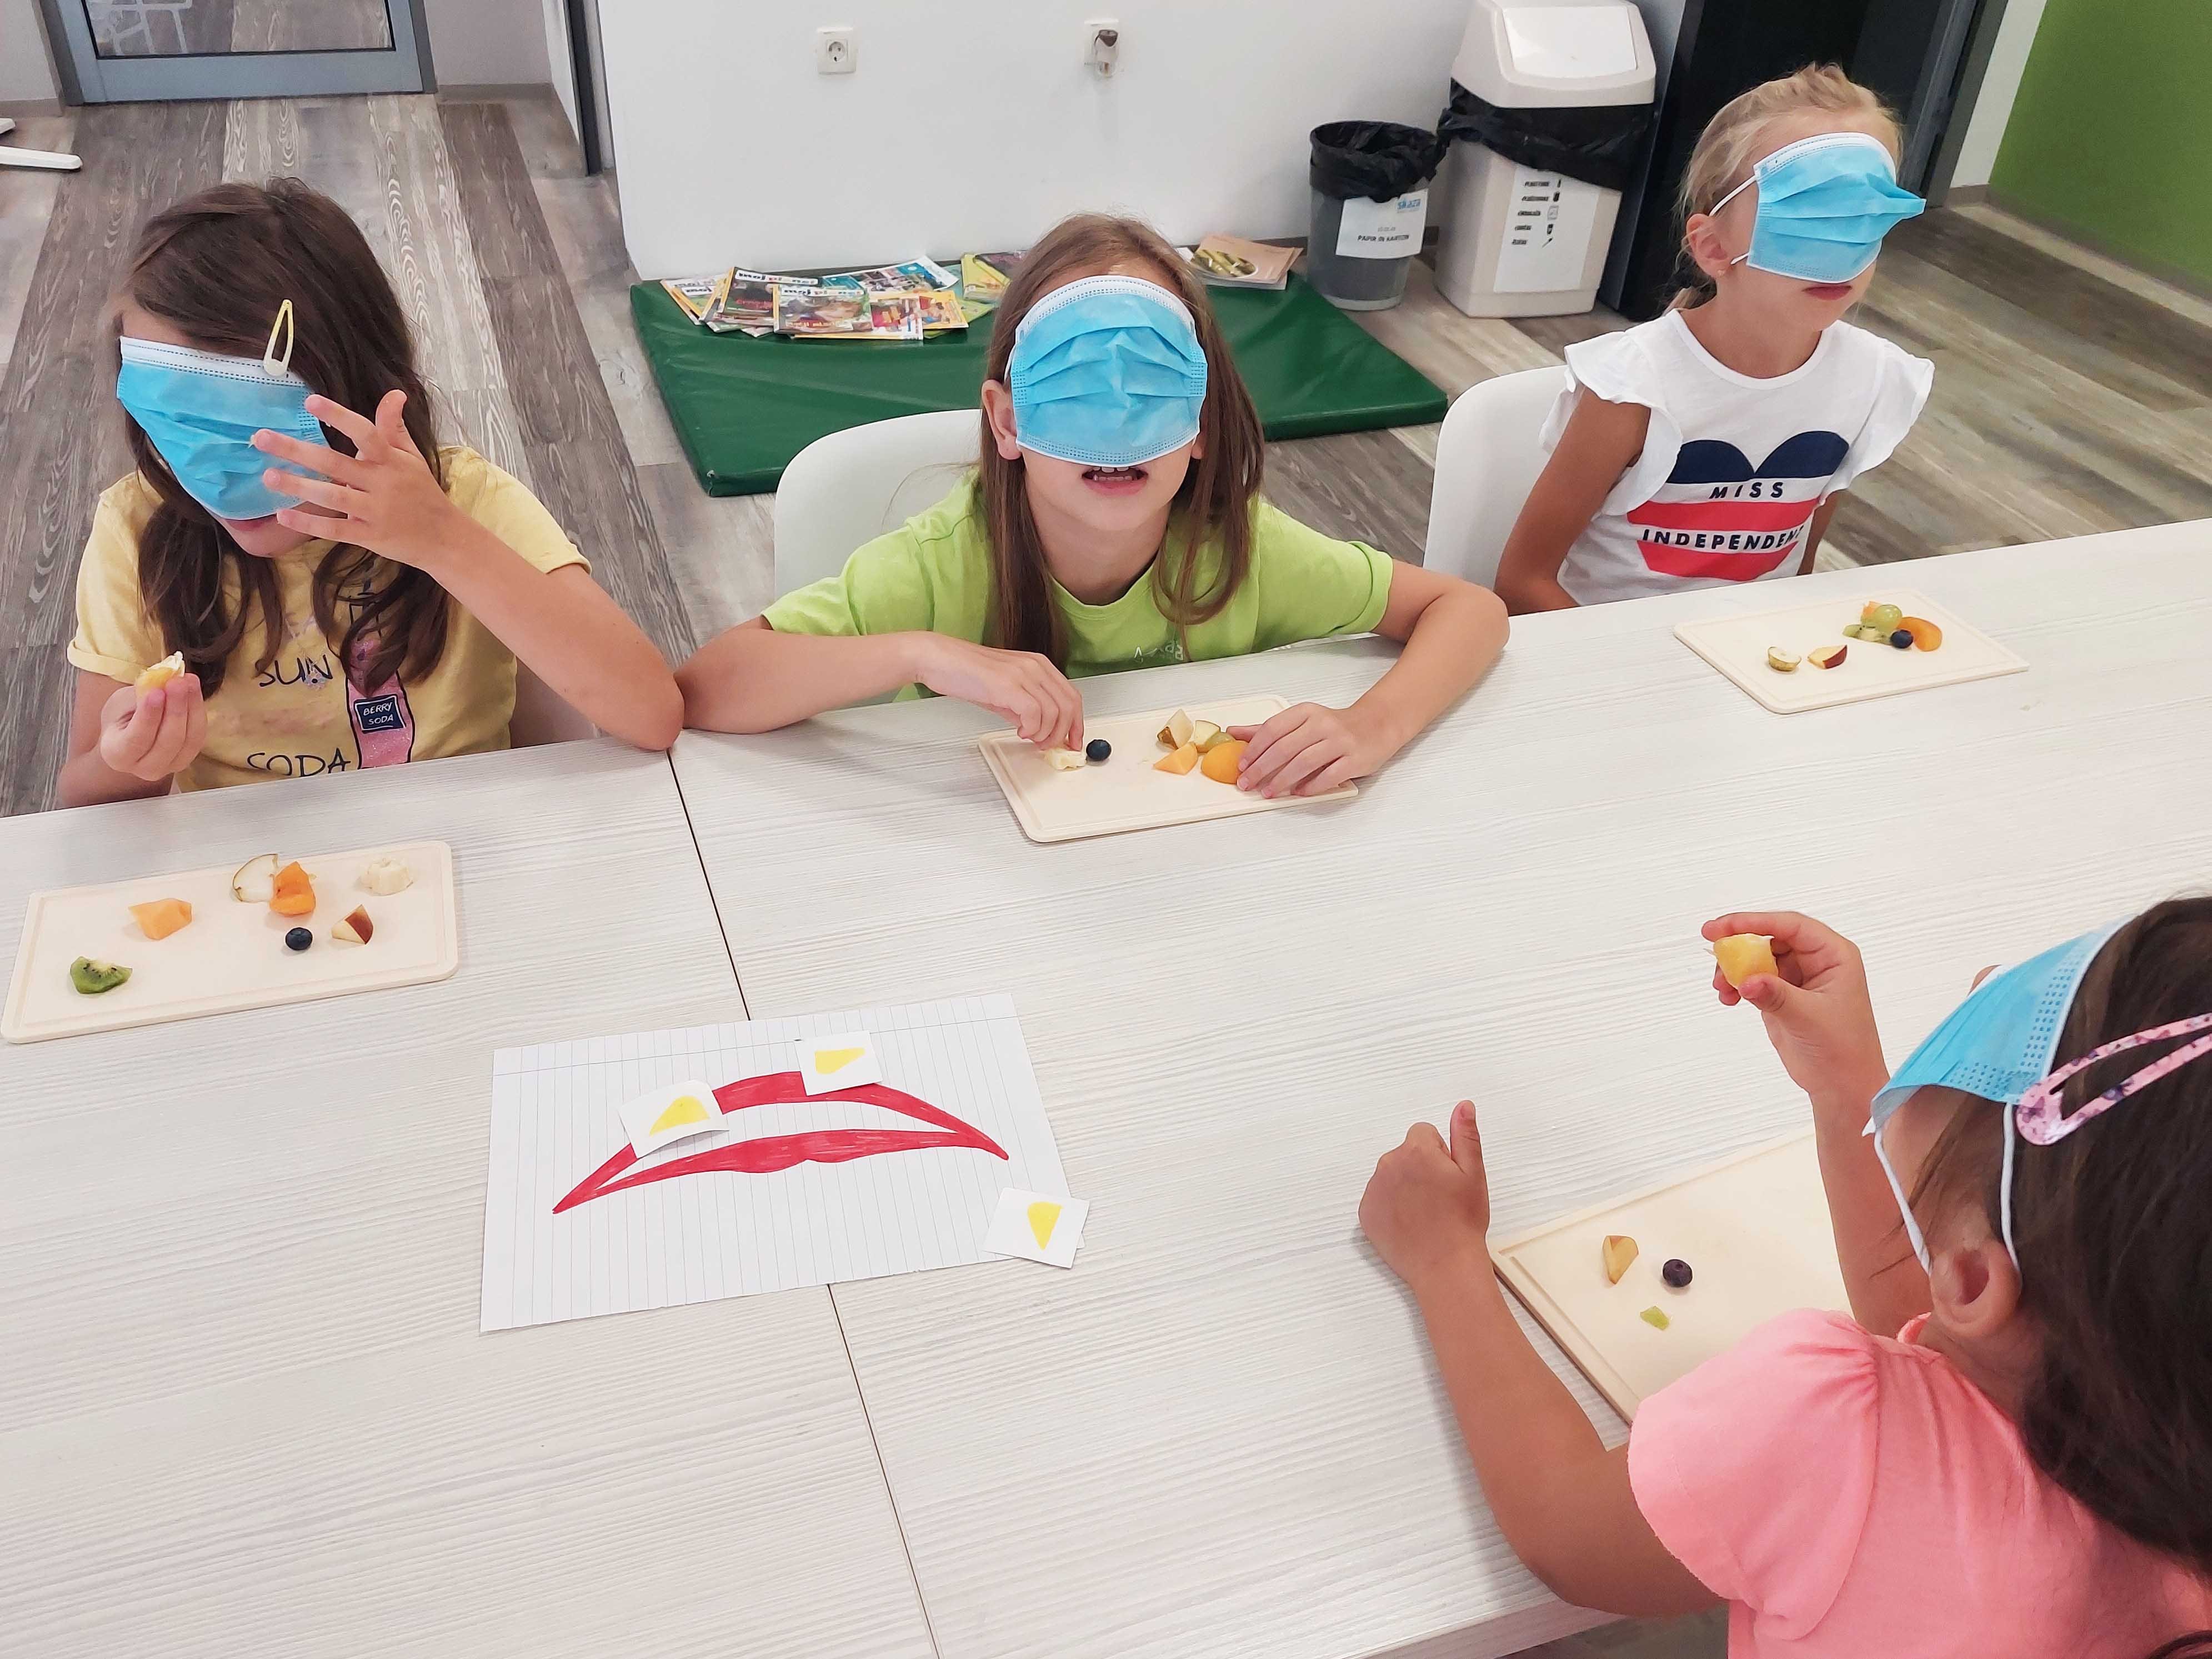 The kids had a workshop on smelling, tasting and touching food